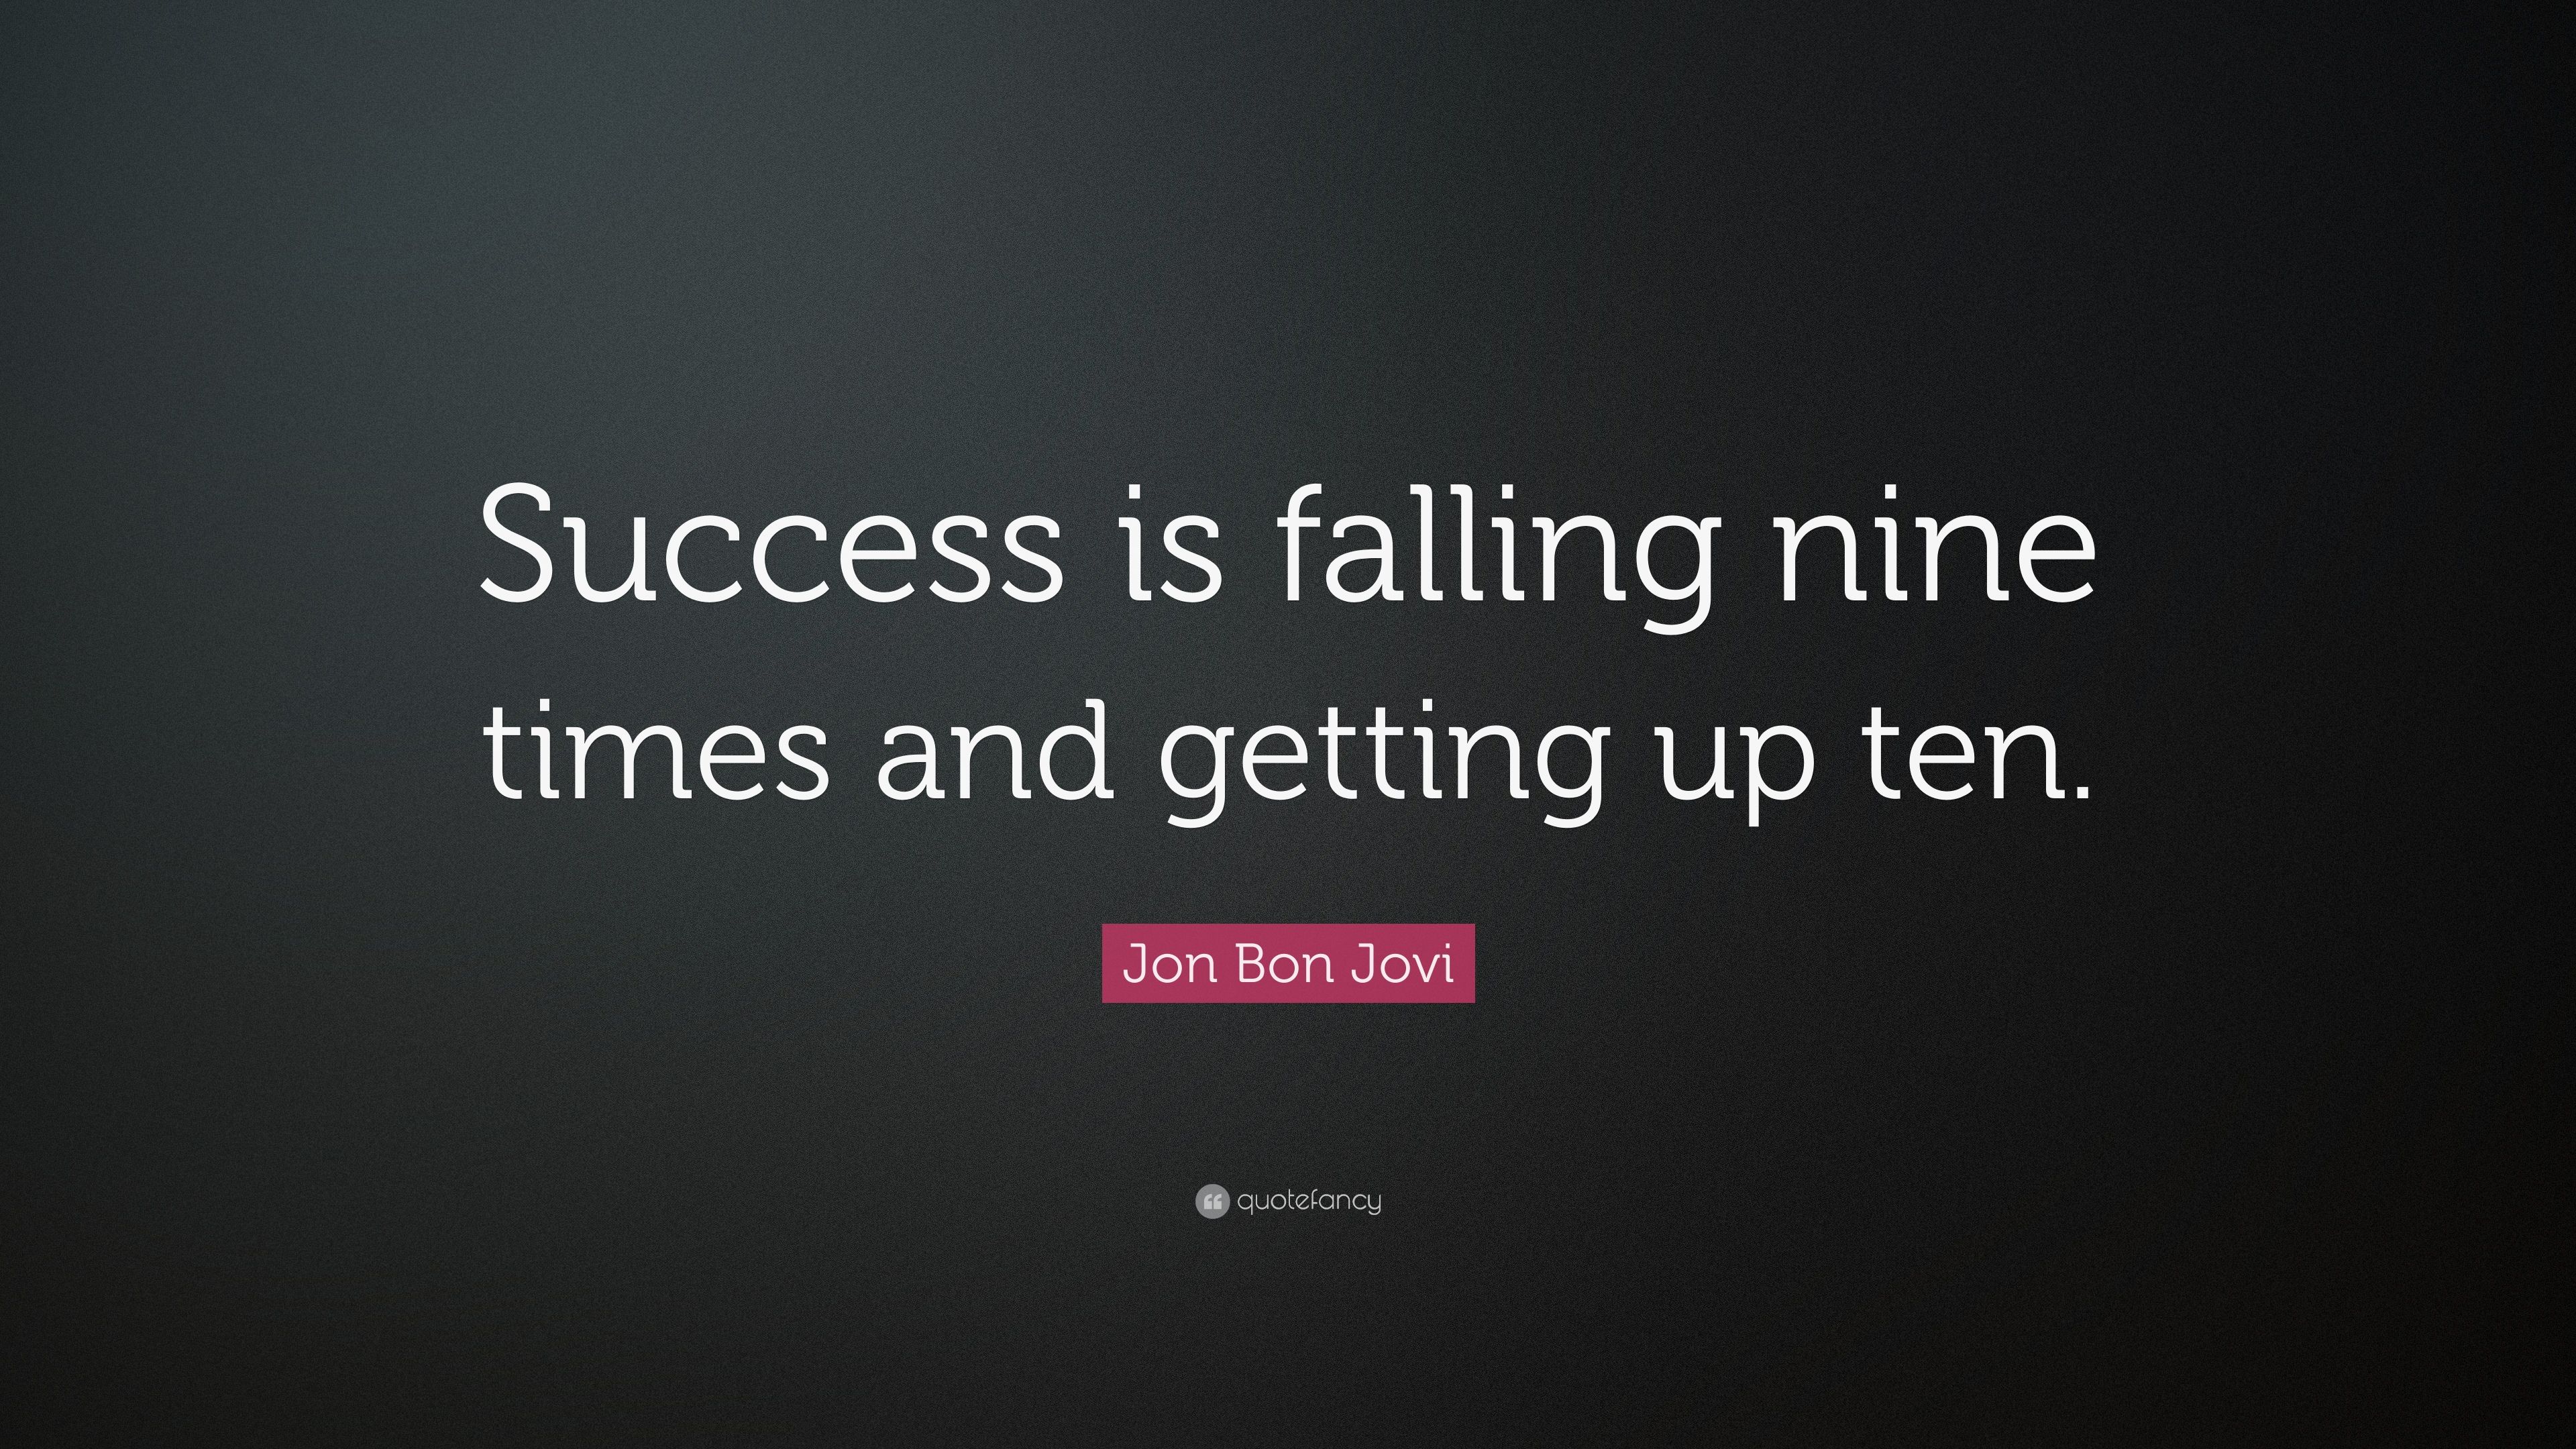 Jon Bon Jovi Quote: “Success is falling nine times and getting up